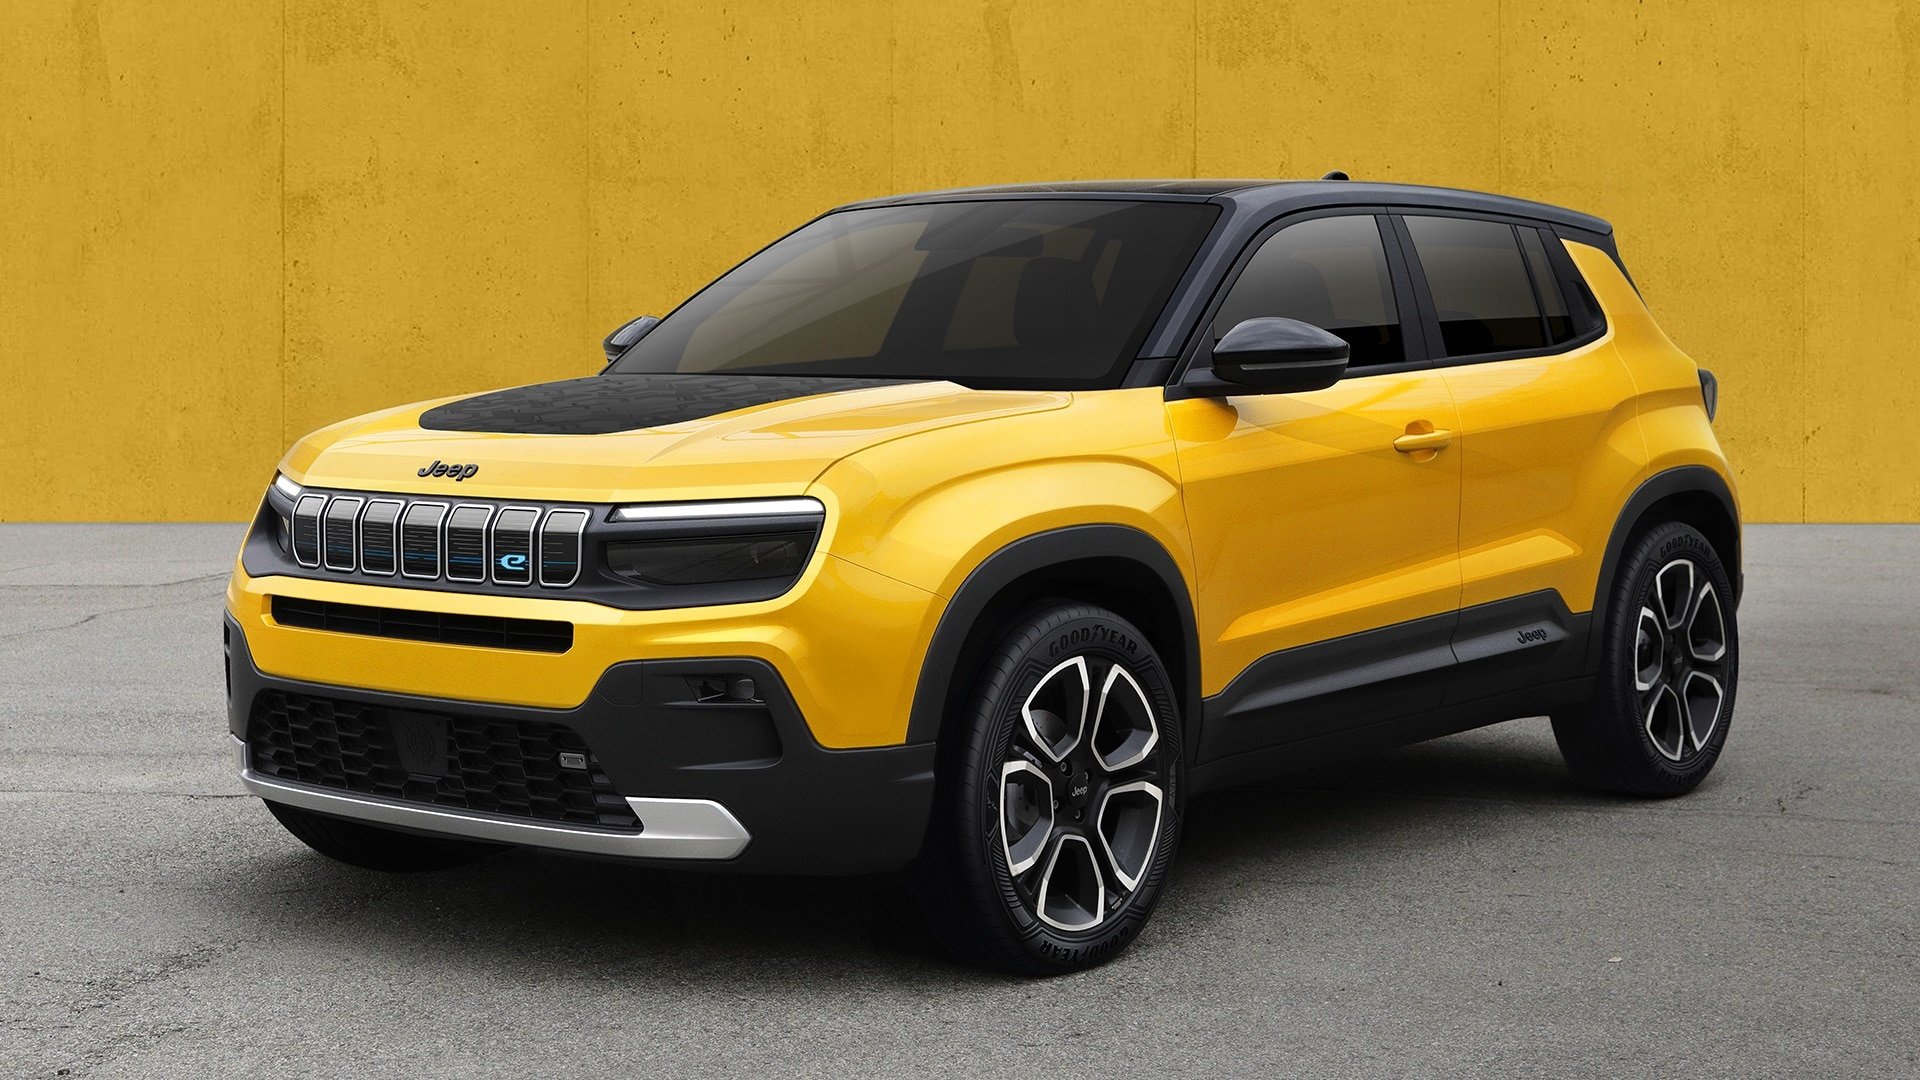 Jeep Reveals Image of FirstEver Fully Electric Jeep SUV The EV Report